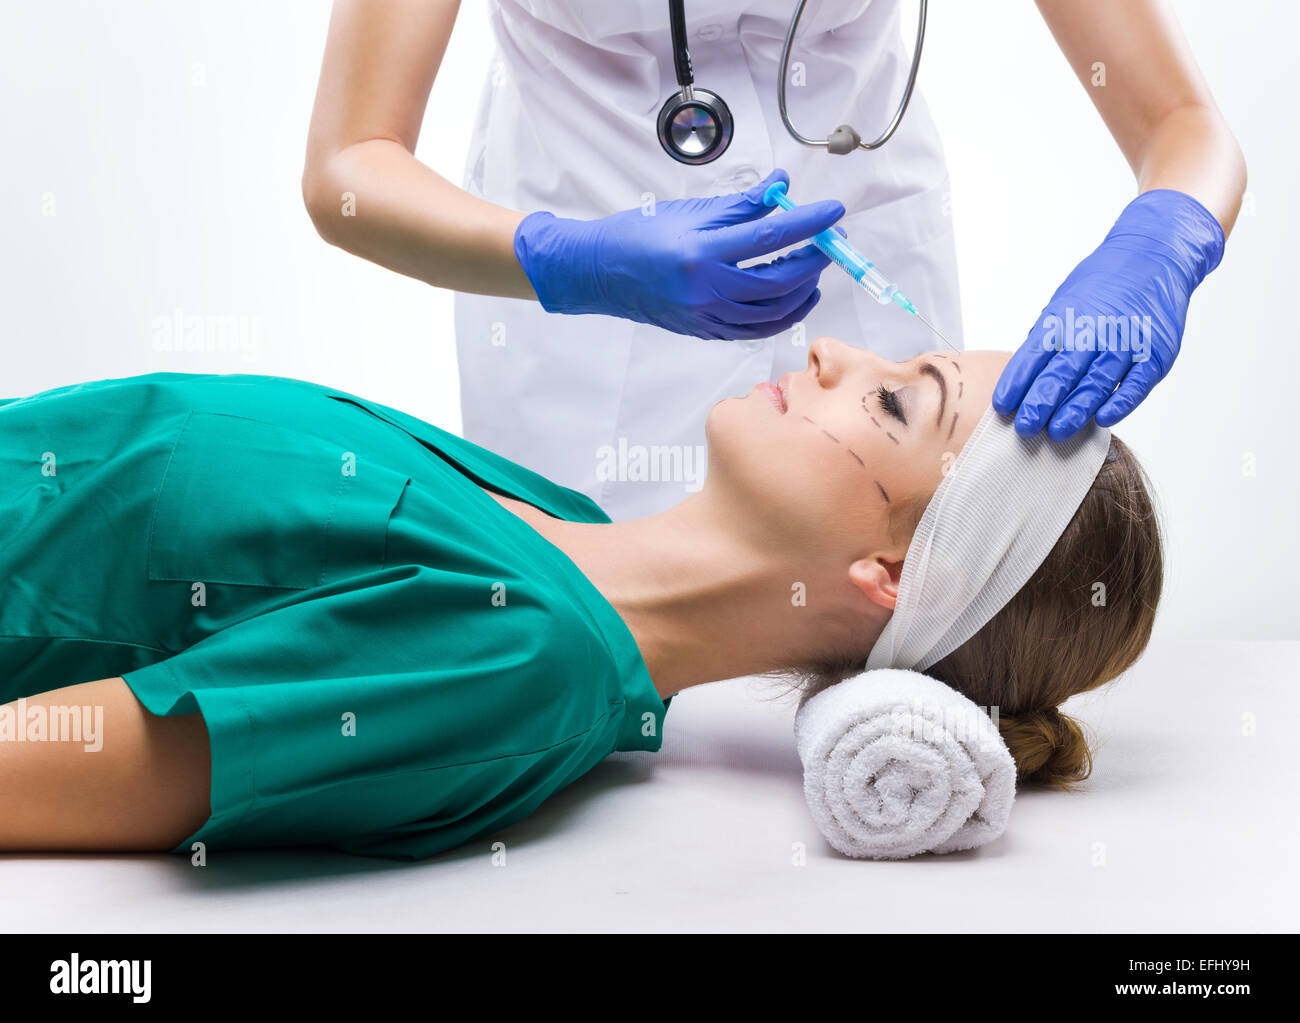 Plastic surgery - Beautiful woman, before surgery, surgical gown lying on the bed Stock Photo